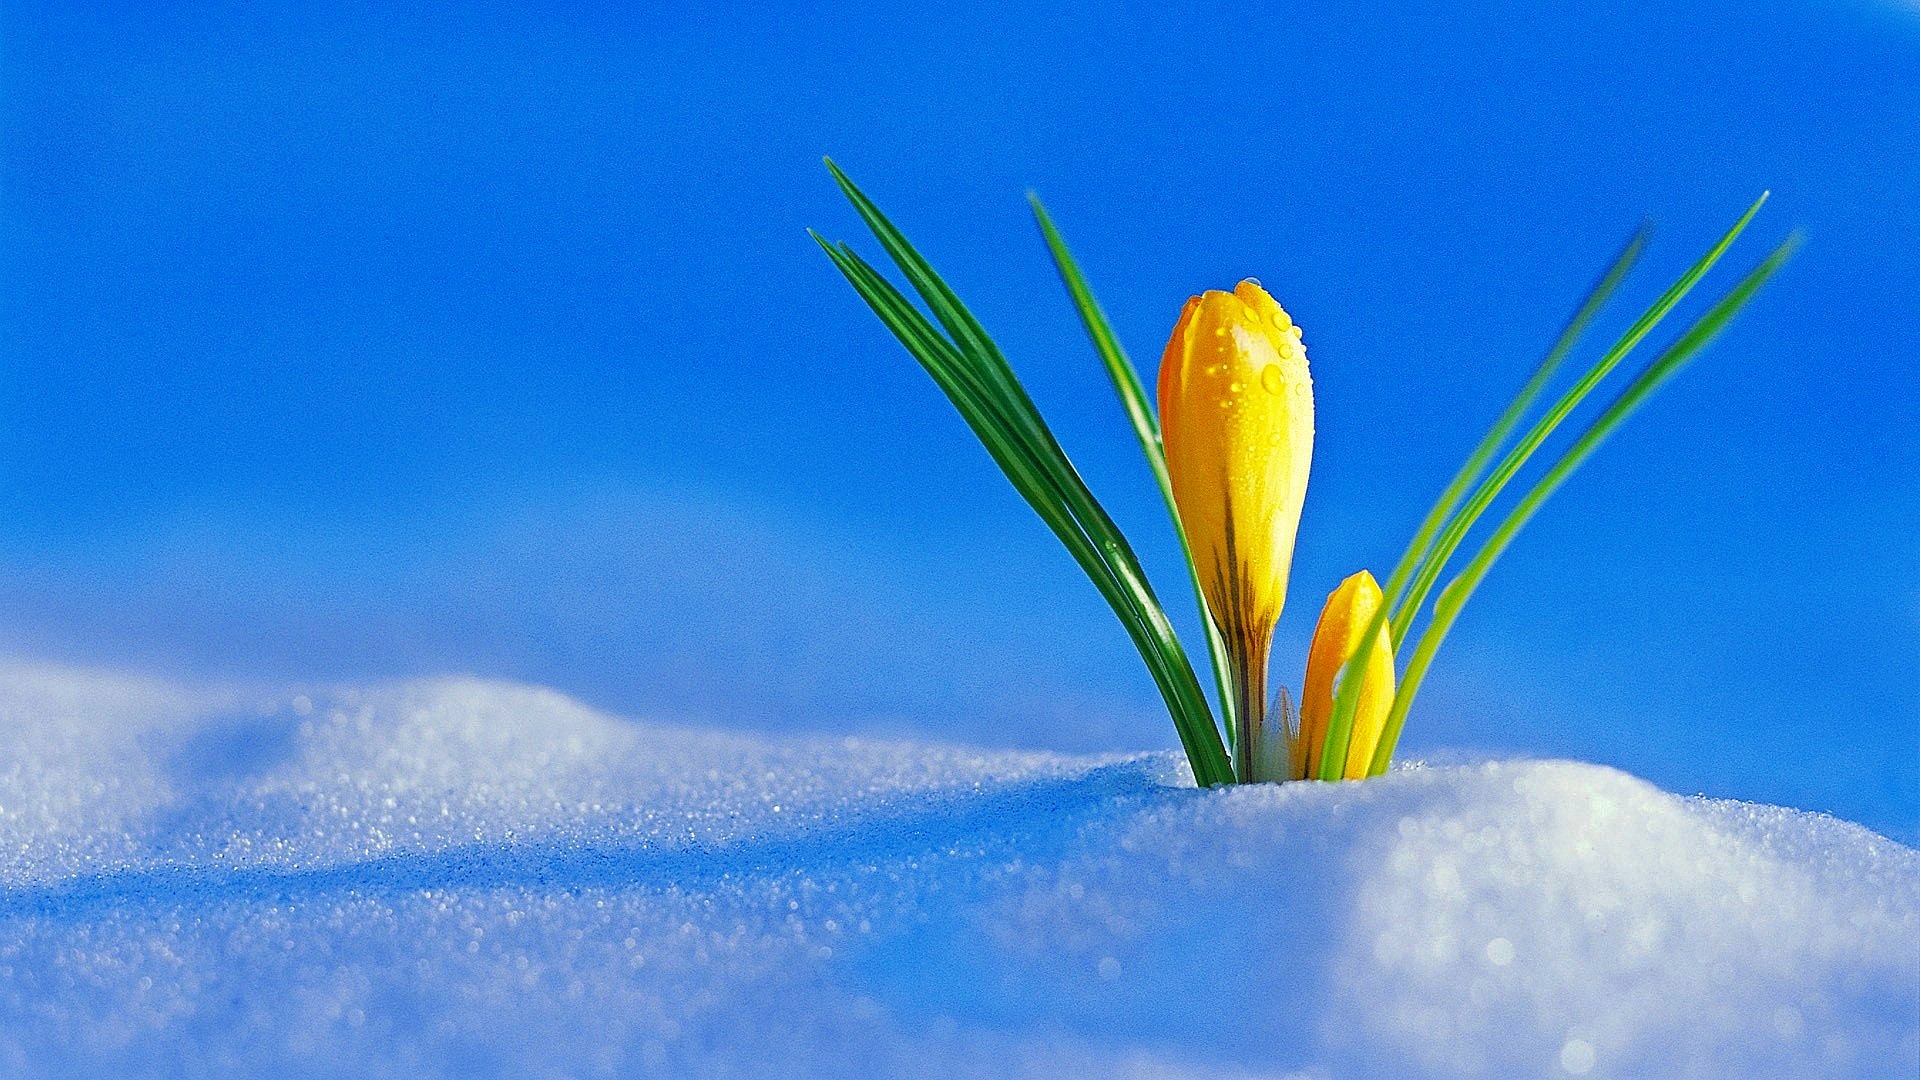 Yellow flowers under the cold snow -Winter and spring season